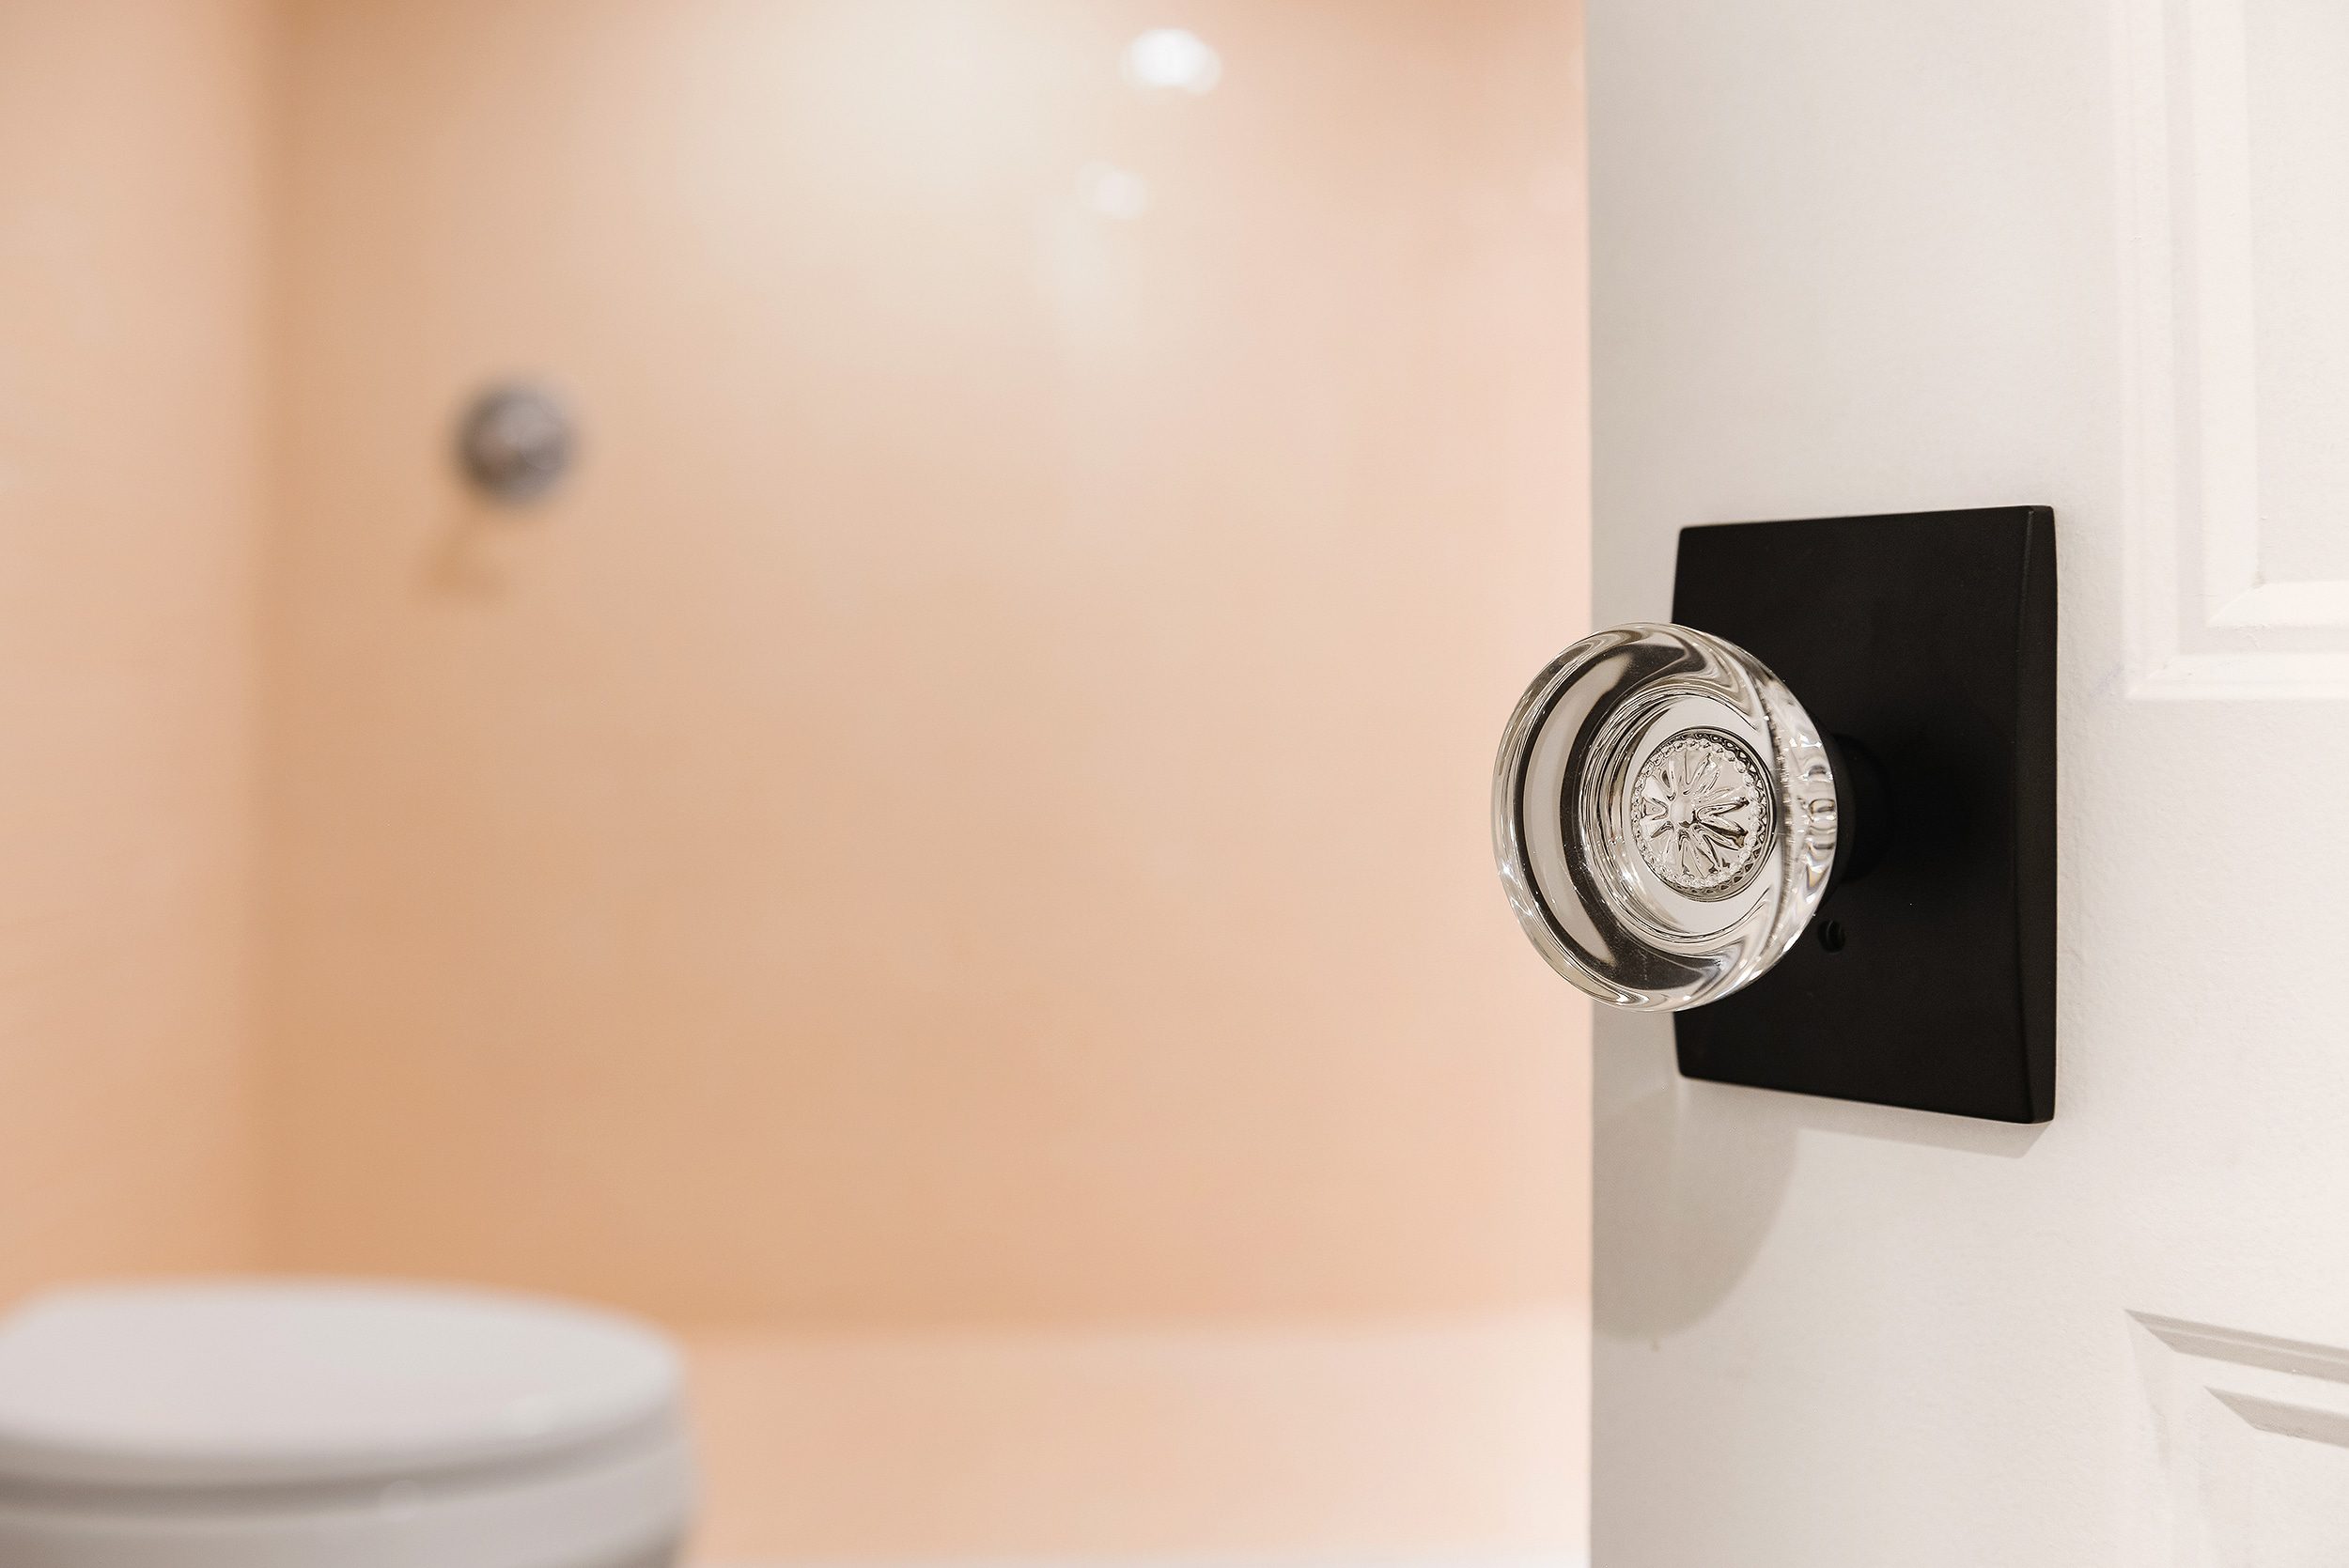 Schlage custom hobson glass knob detail, entering a bathroom with peachy-pink tile | via Yellow Brick Home